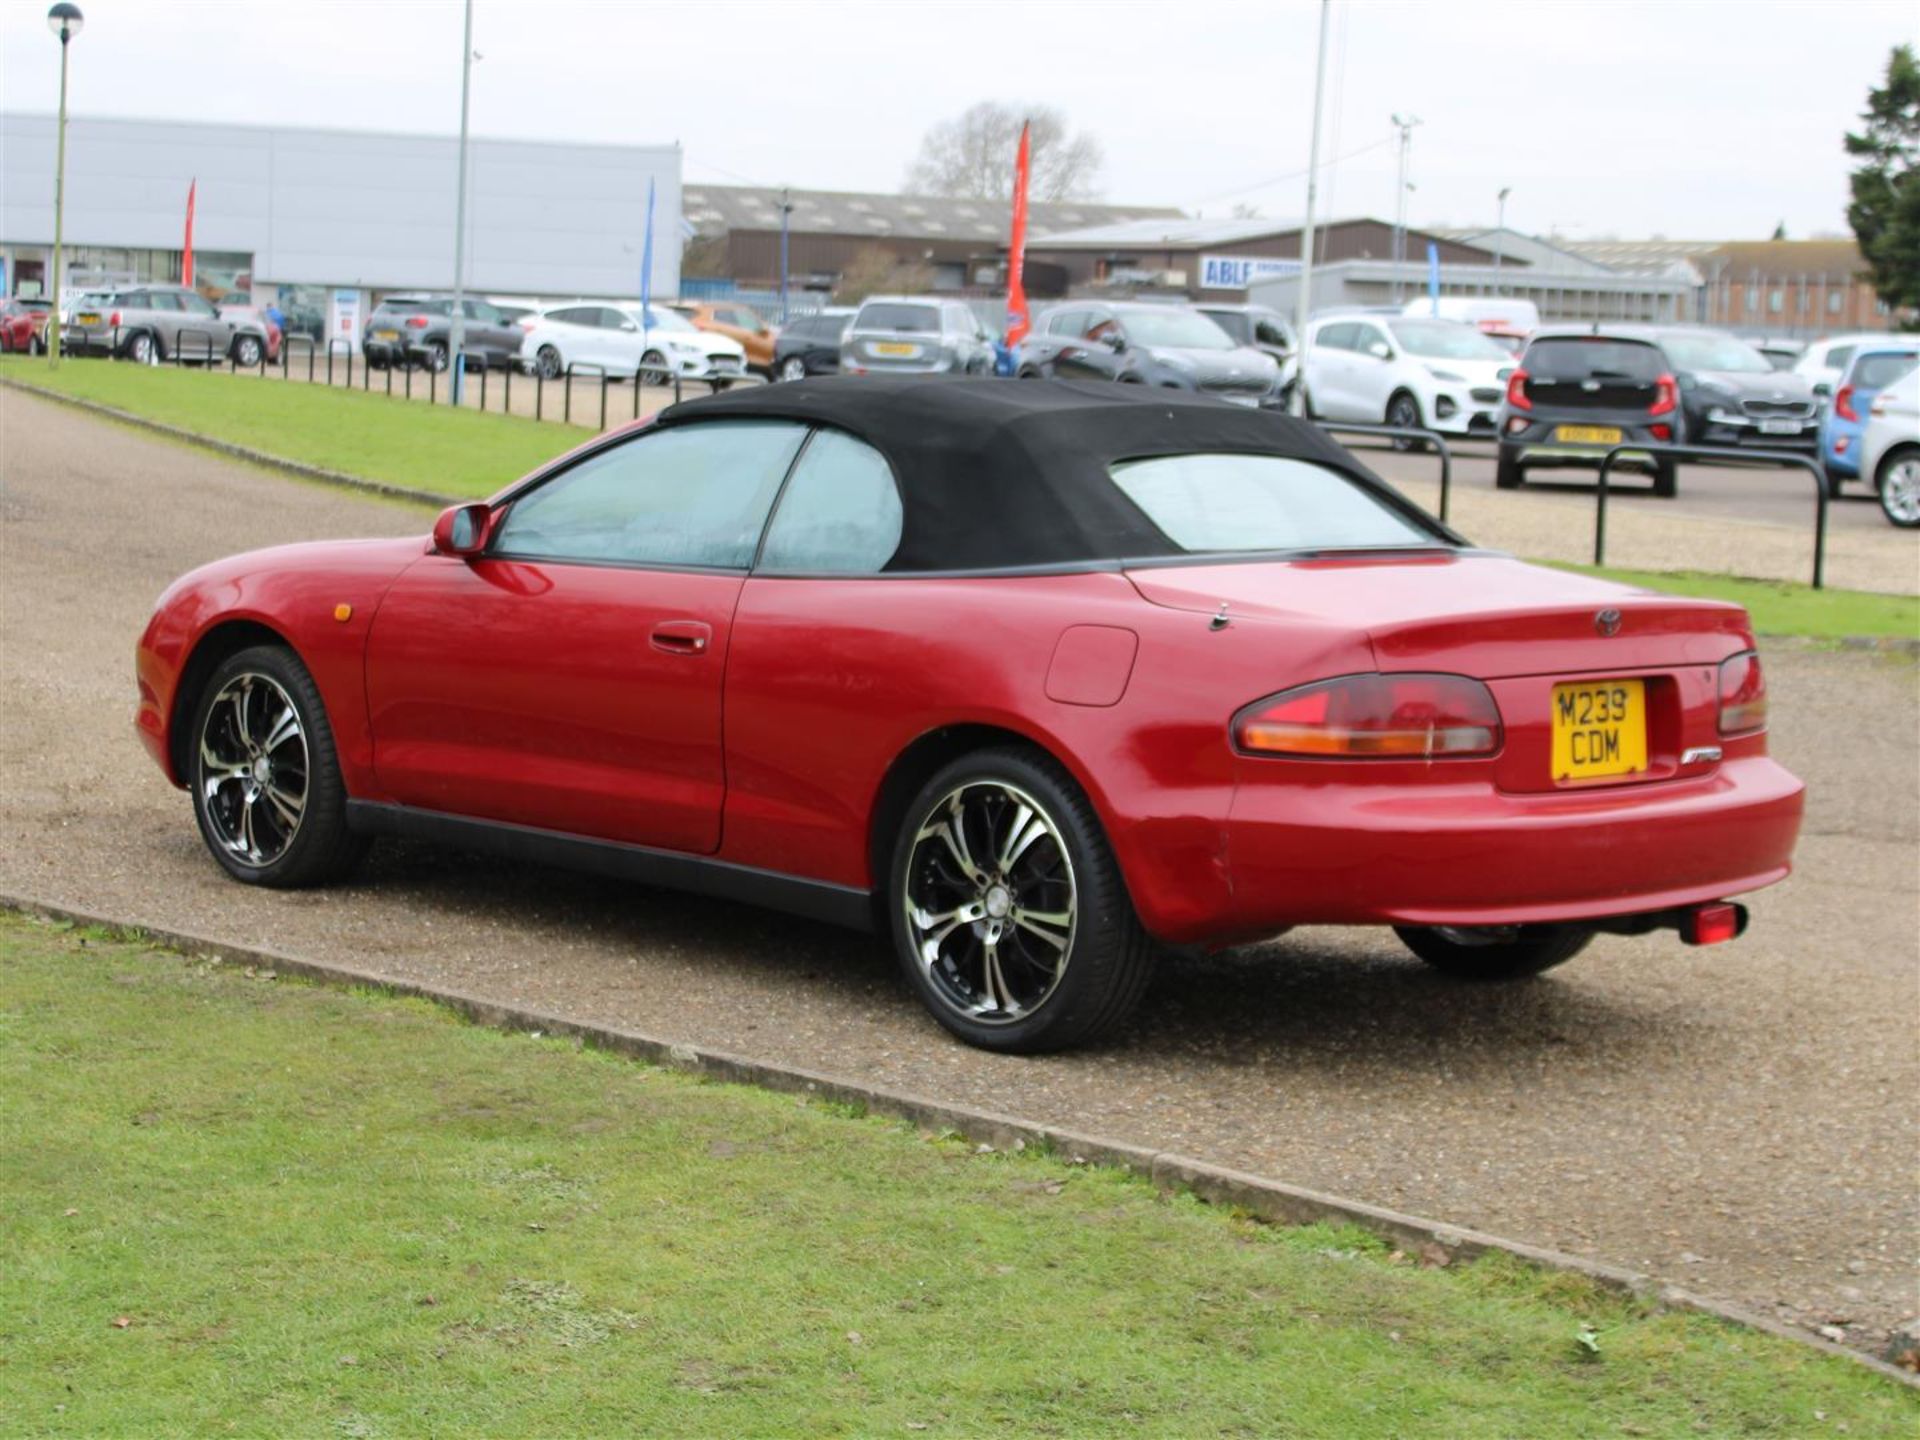 1995 Toyota Celica ST202 Convertible - Image 5 of 20